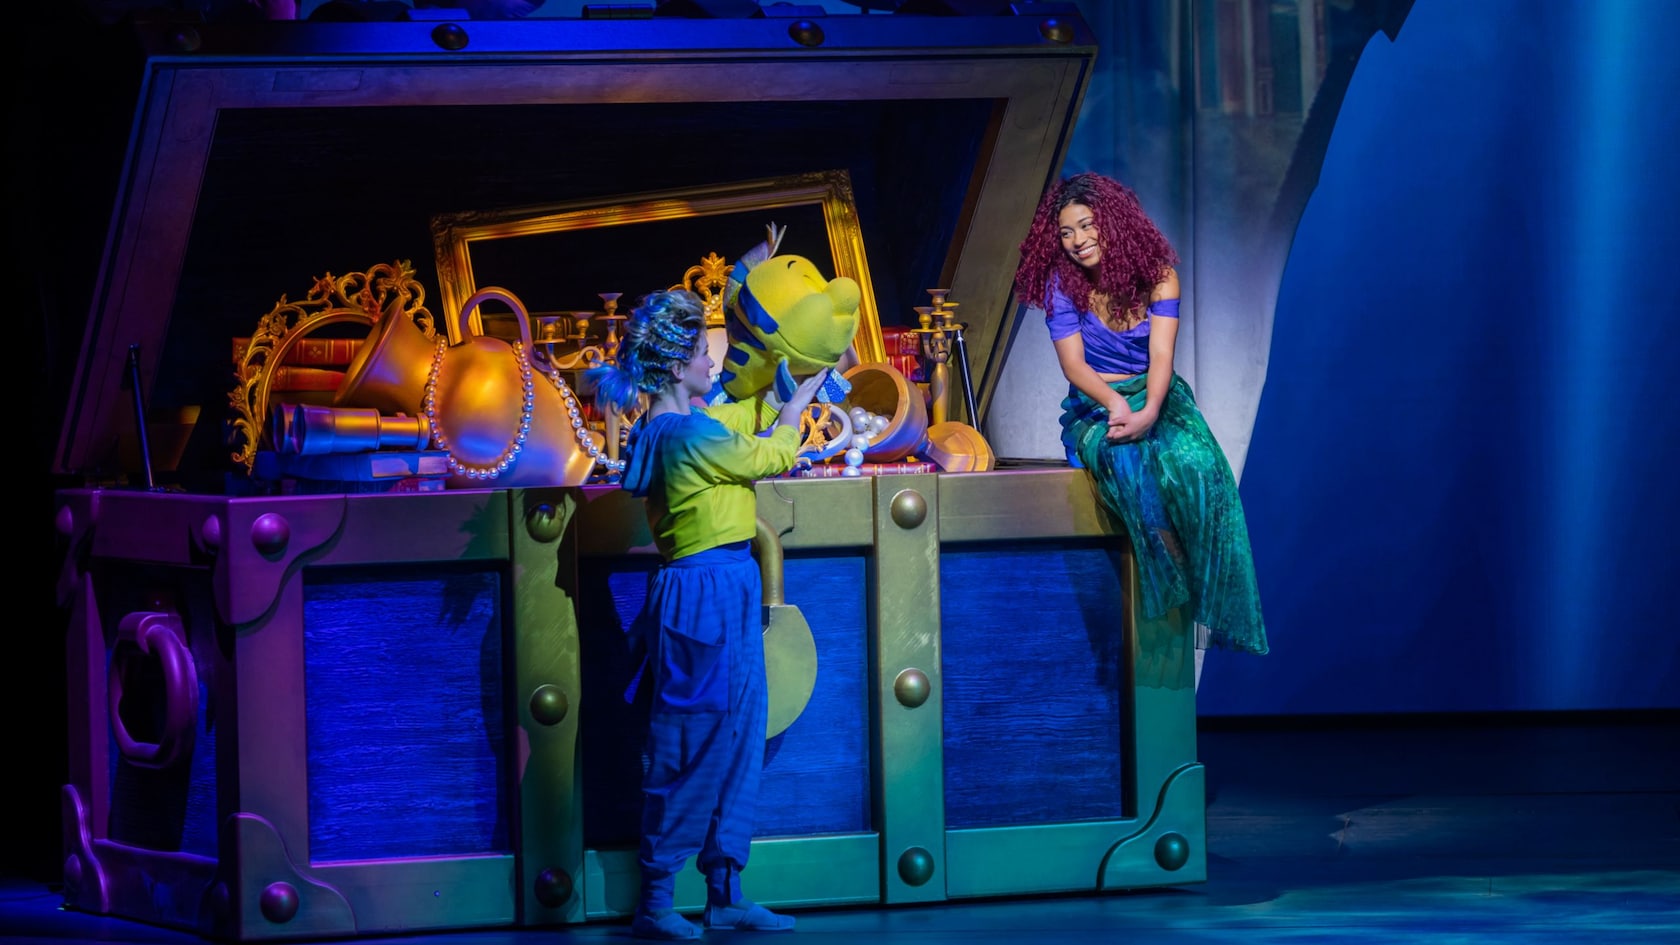 A stage performance of The Little Mermaid reveals Ariel sitting on a giant treasure chest